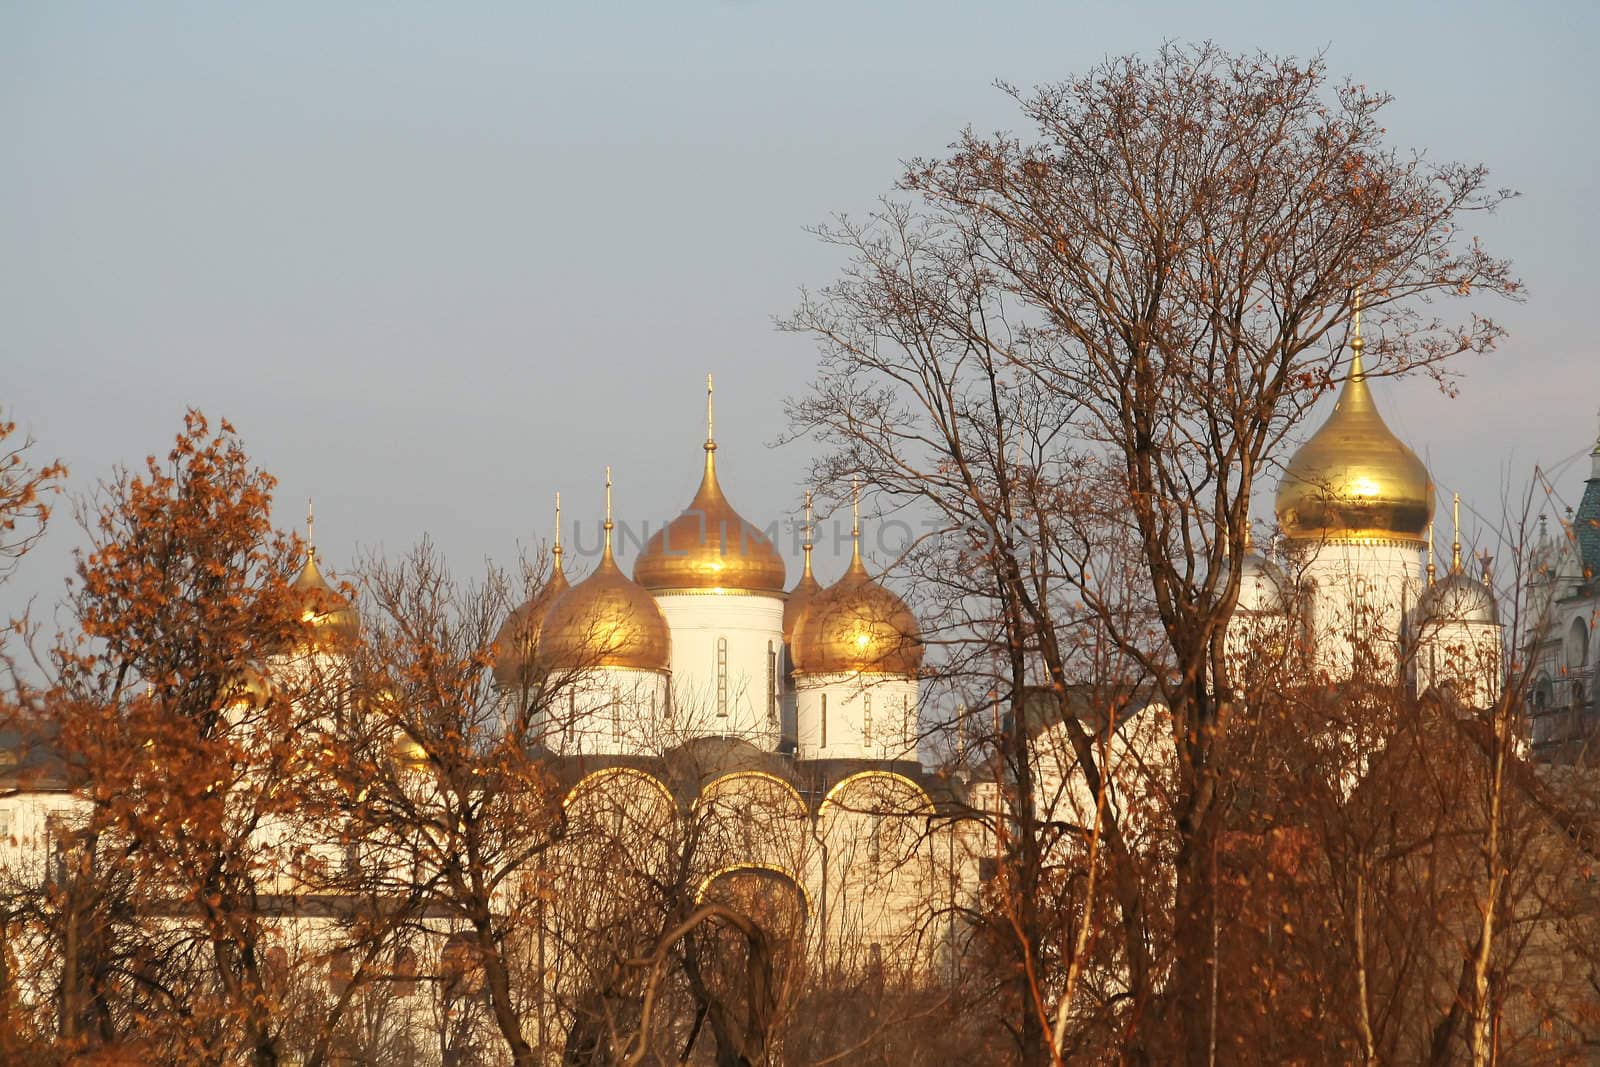 The Golden Domes of church in Old Moscow, Russia